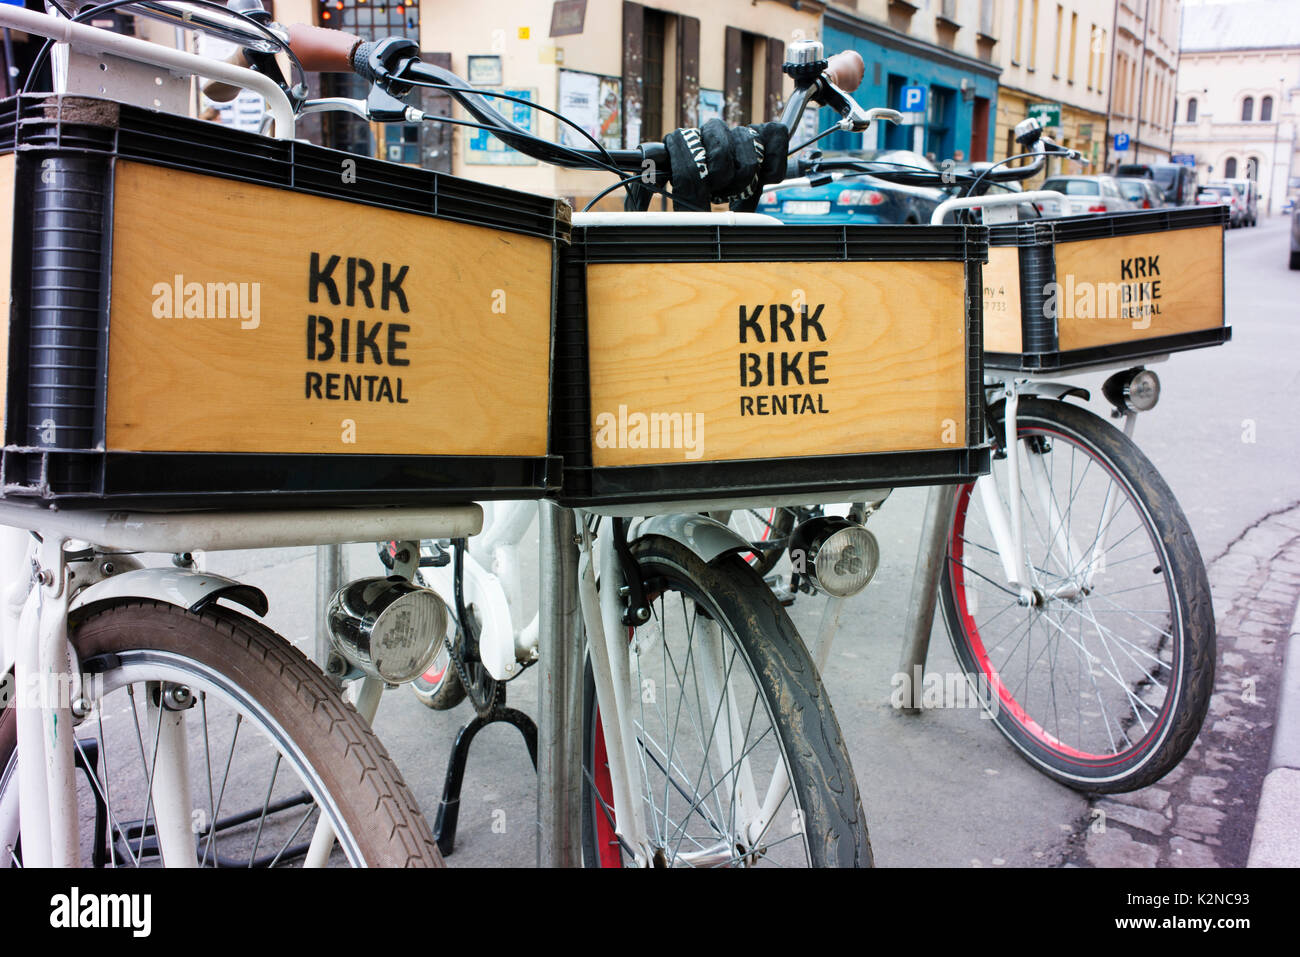 Bicycles with luggage capacity available for hire in Krakow's Kazimierz district. Stock Photo